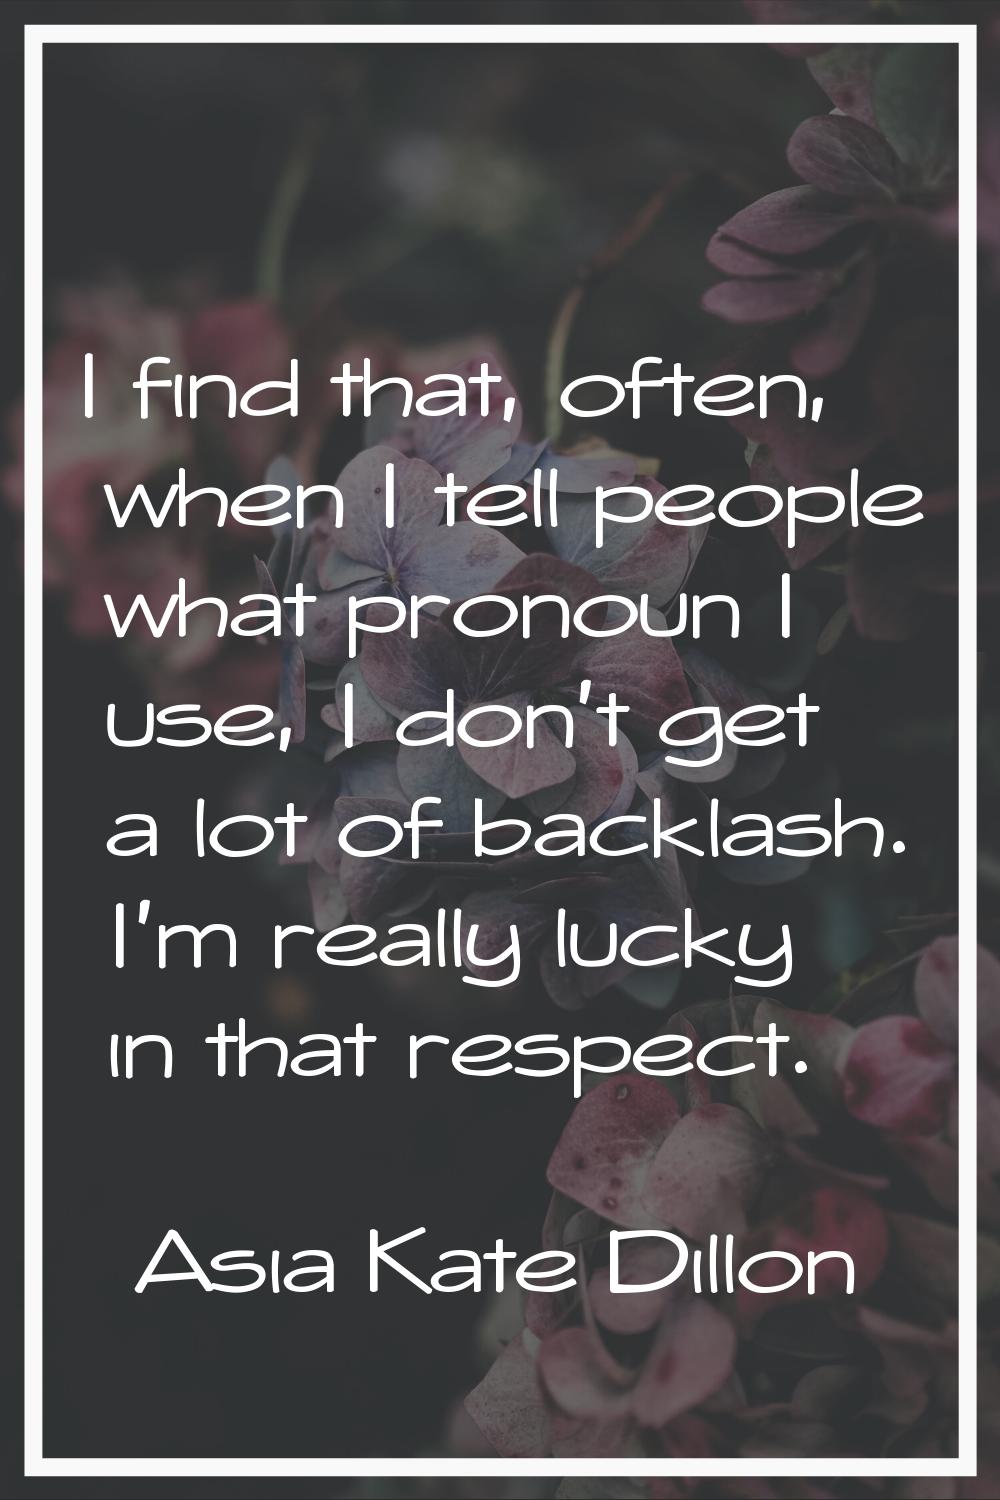 I find that, often, when I tell people what pronoun I use, I don't get a lot of backlash. I'm reall